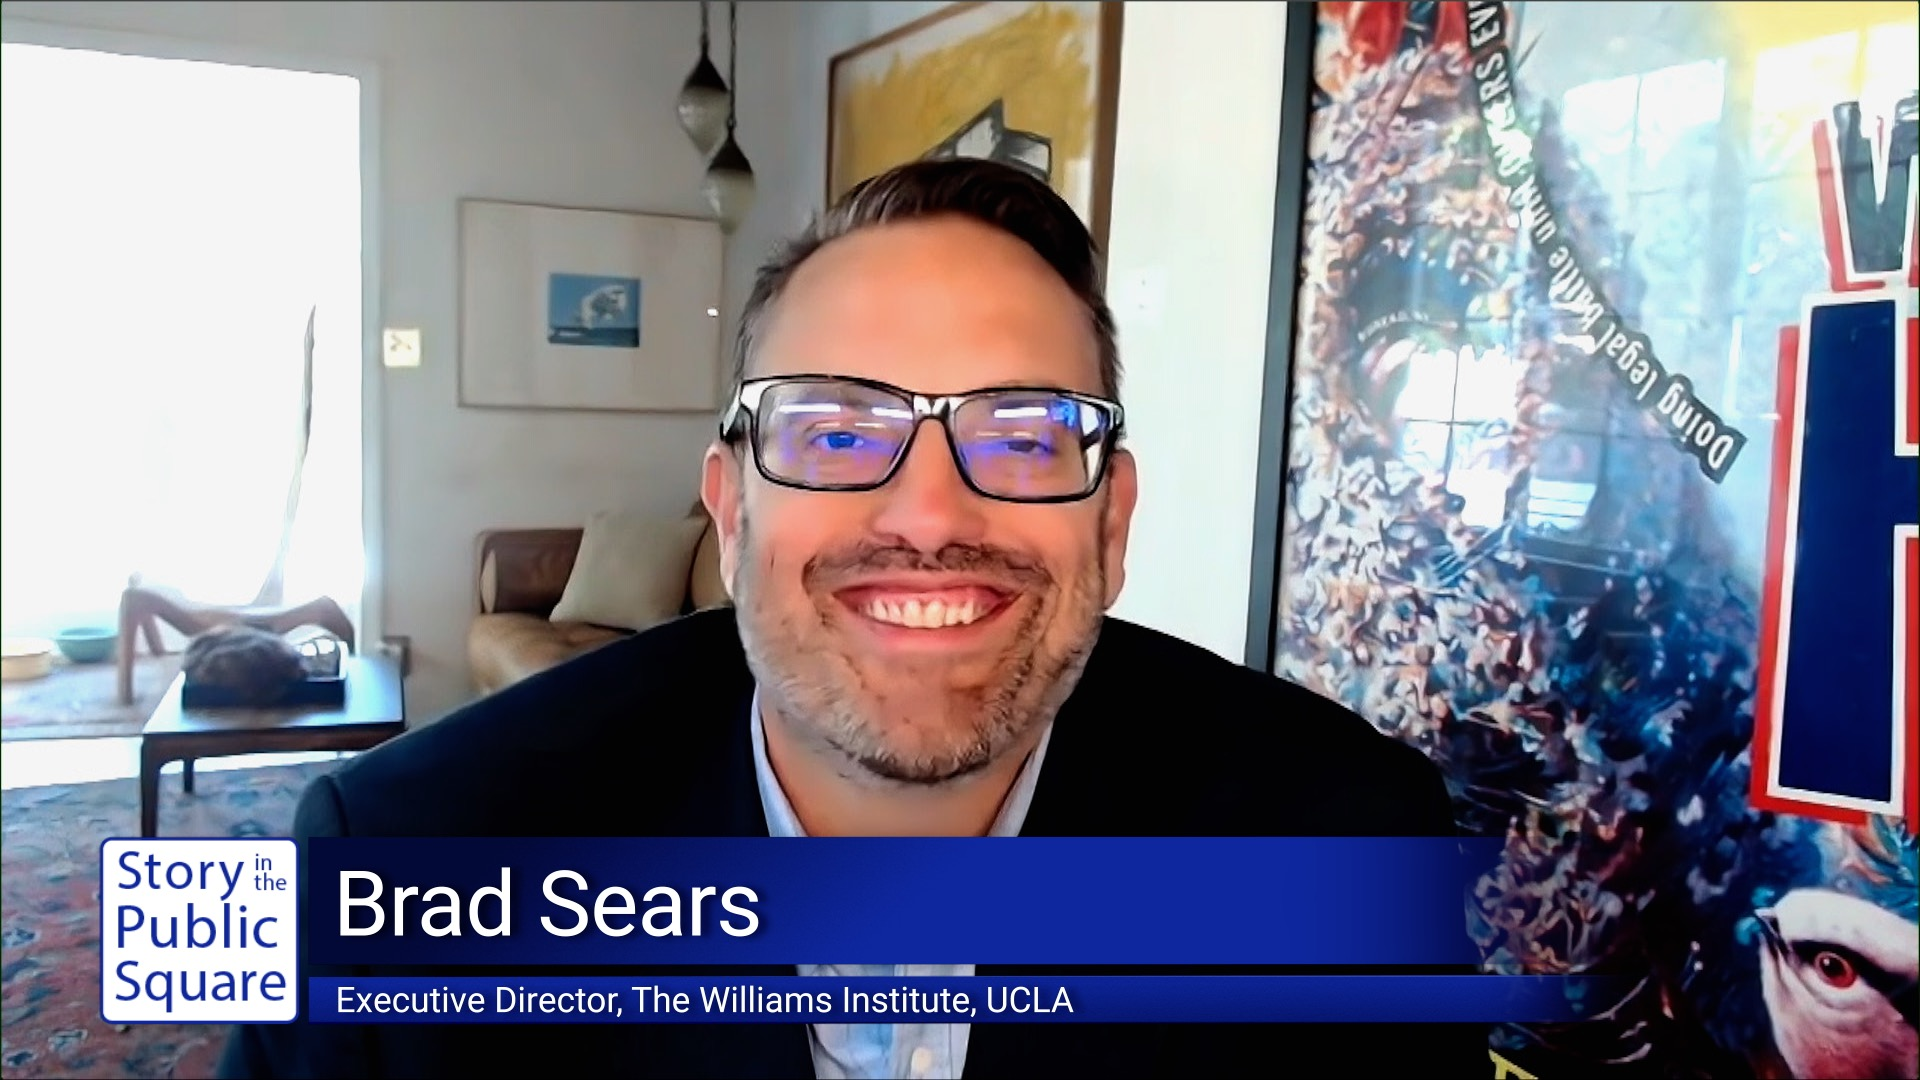 Brad Sears on Current Issues Facing the LGBTQ Community